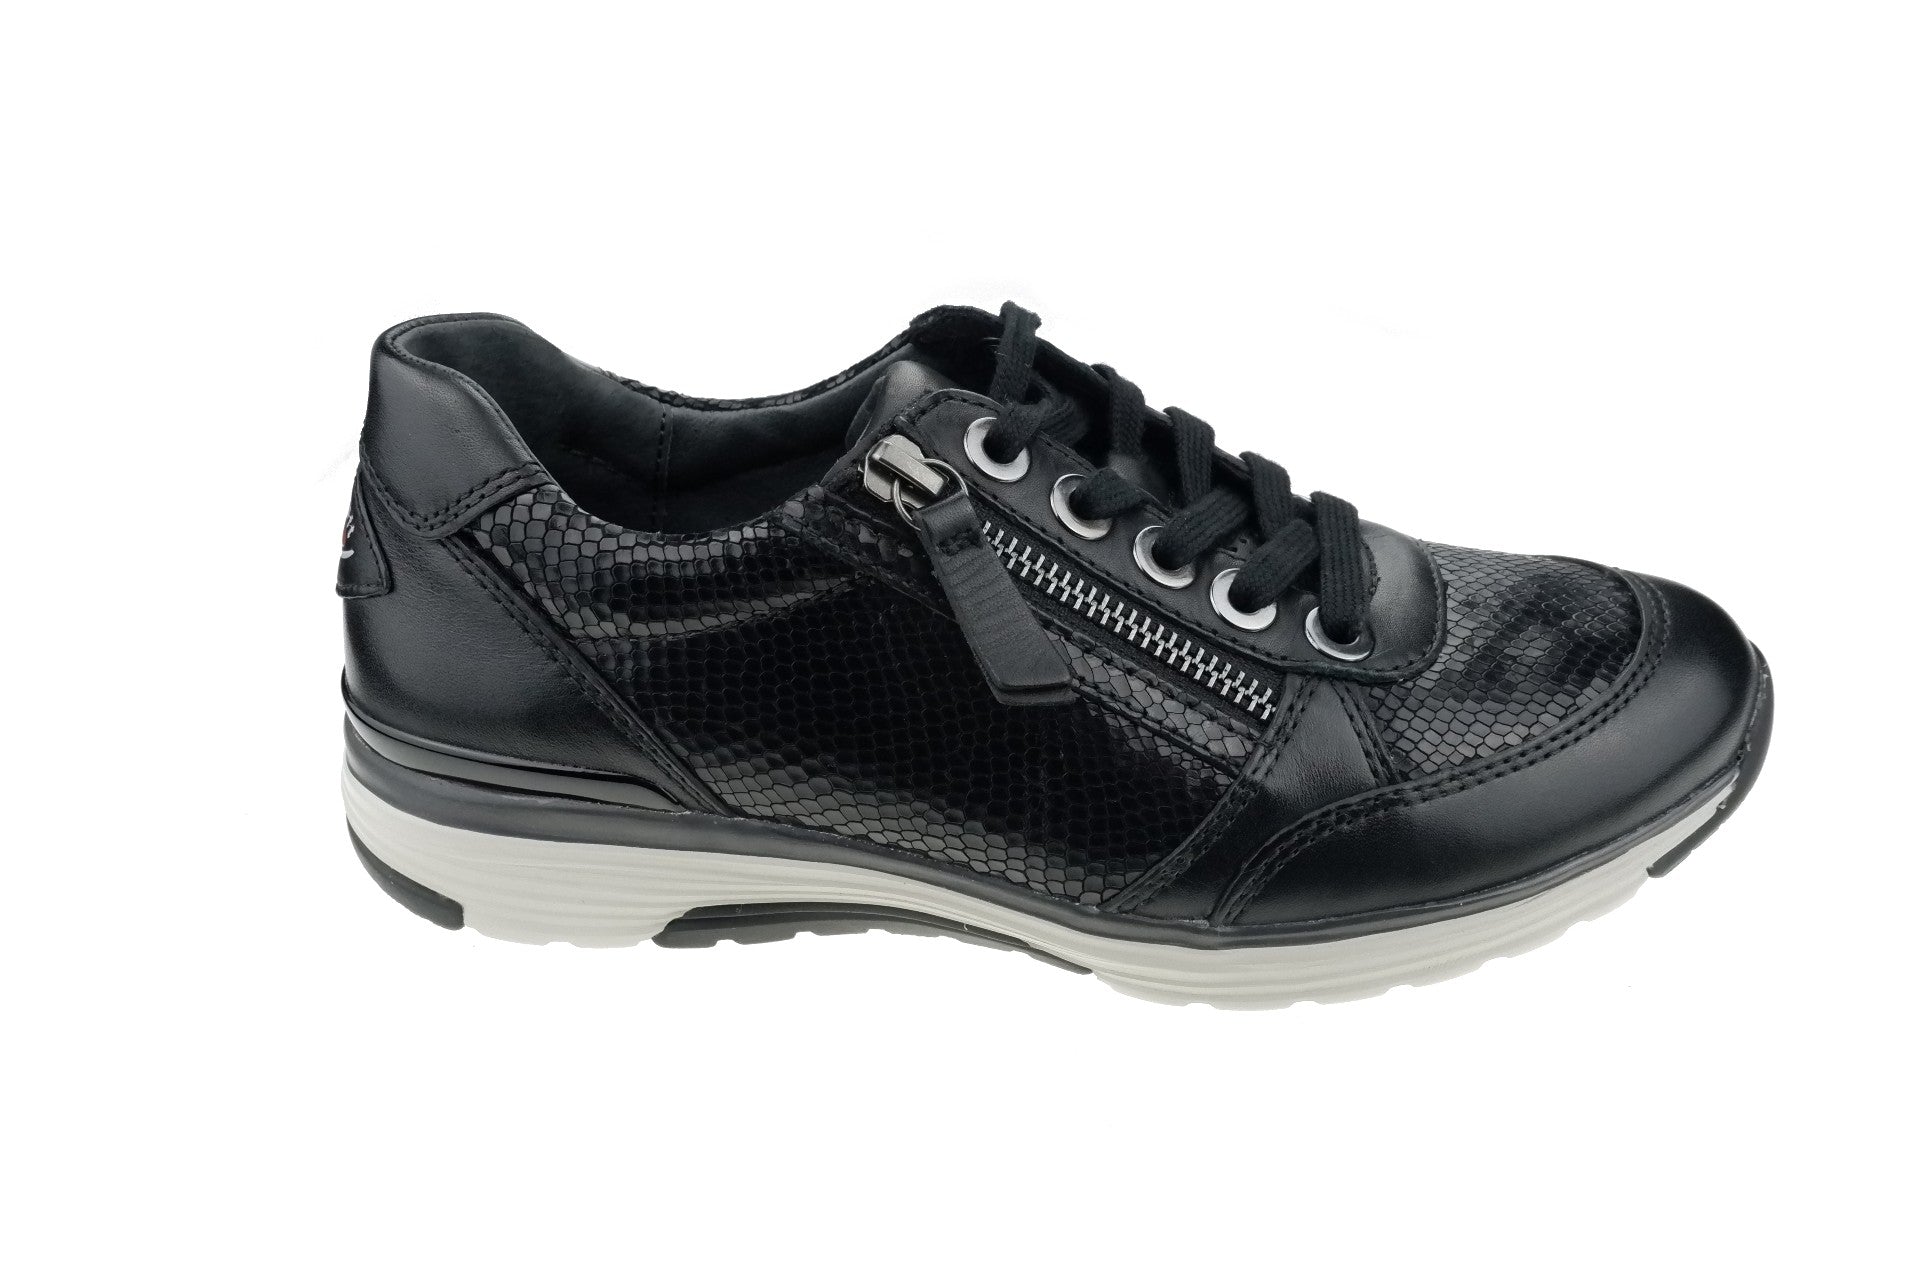 Gabor 76.538.17 - woman's Sneakers - Black leather - Chaplinshoes